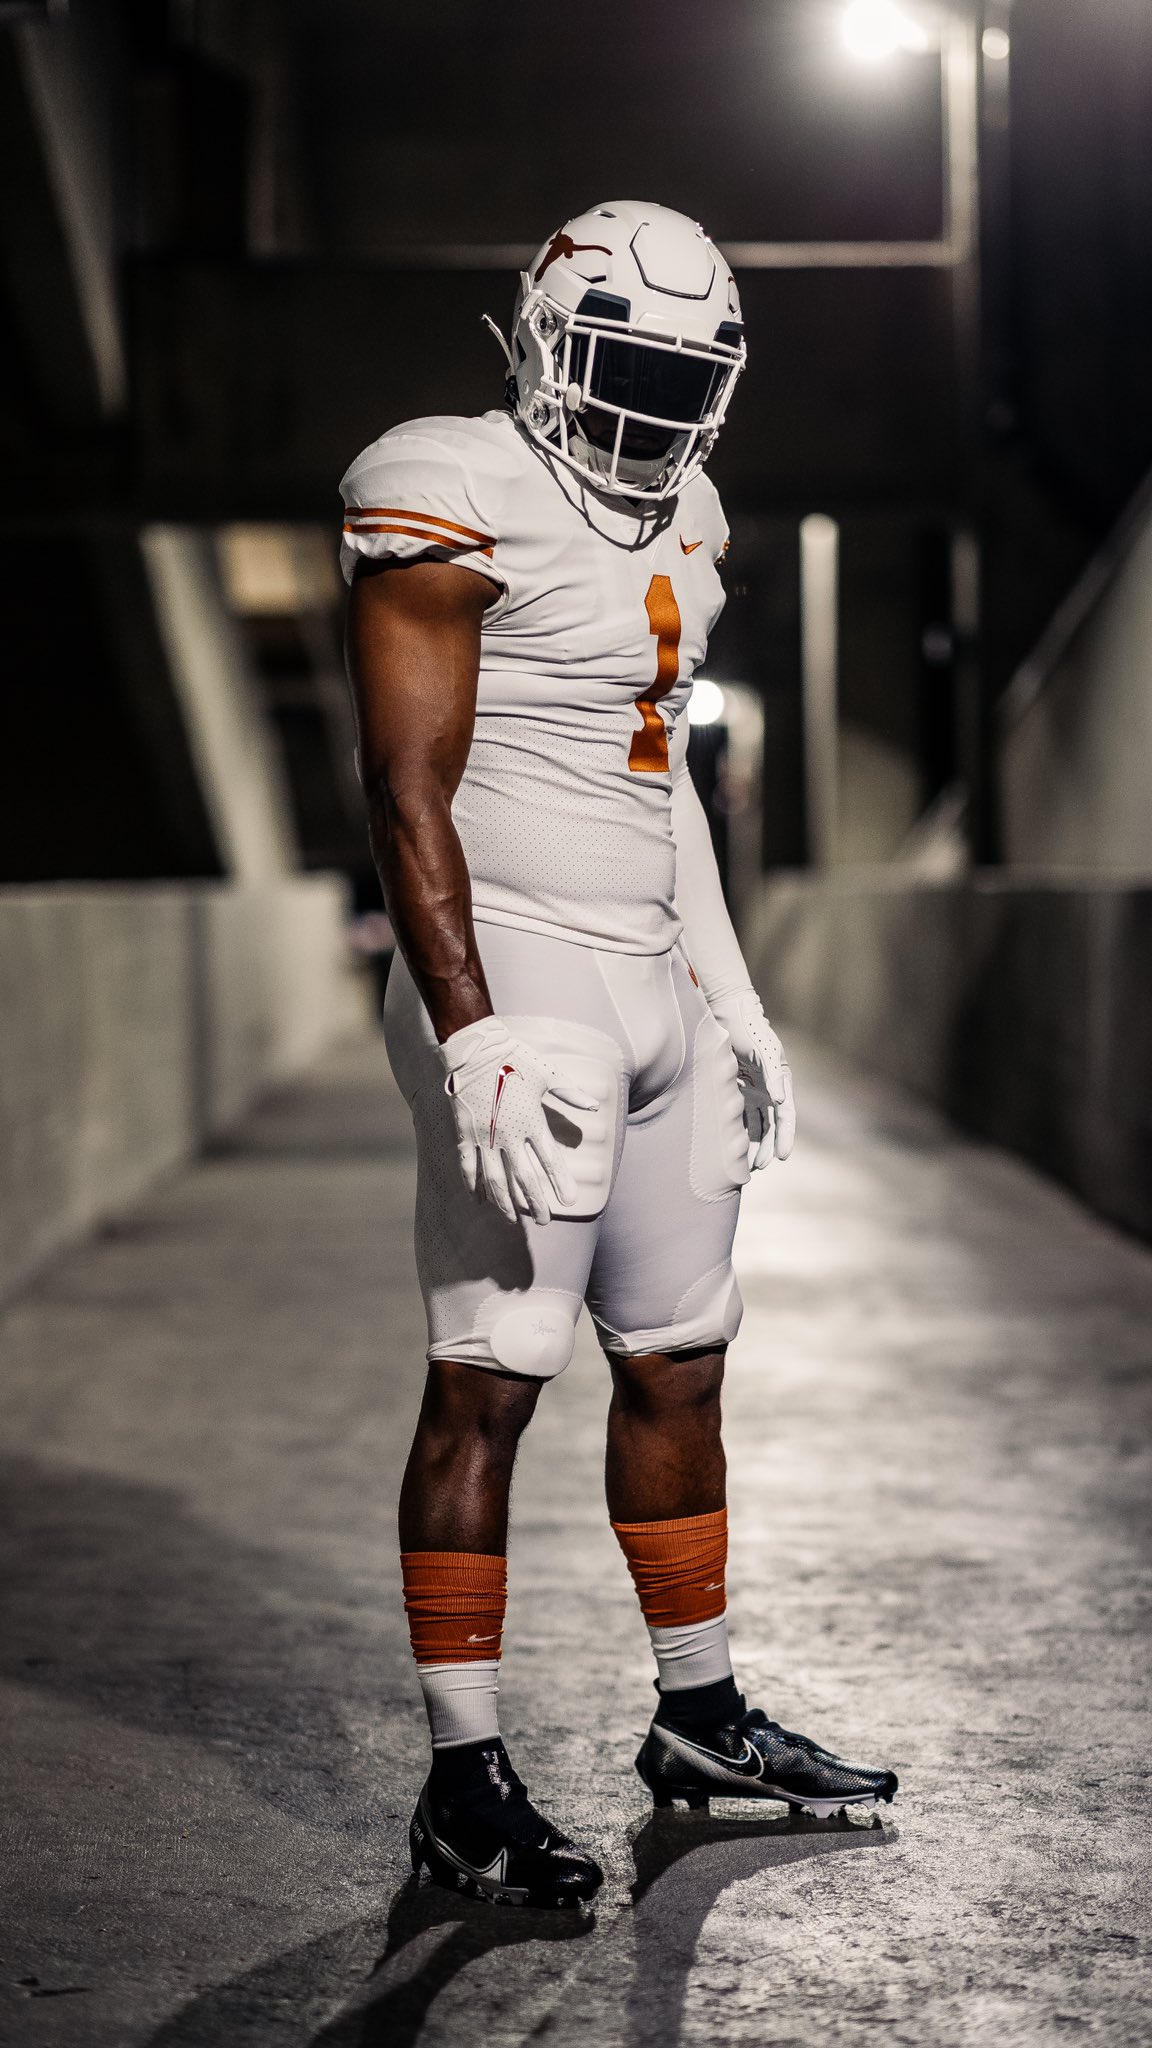 Texas Longhorns to Wear White Throwback Uniforms at Home - Texas